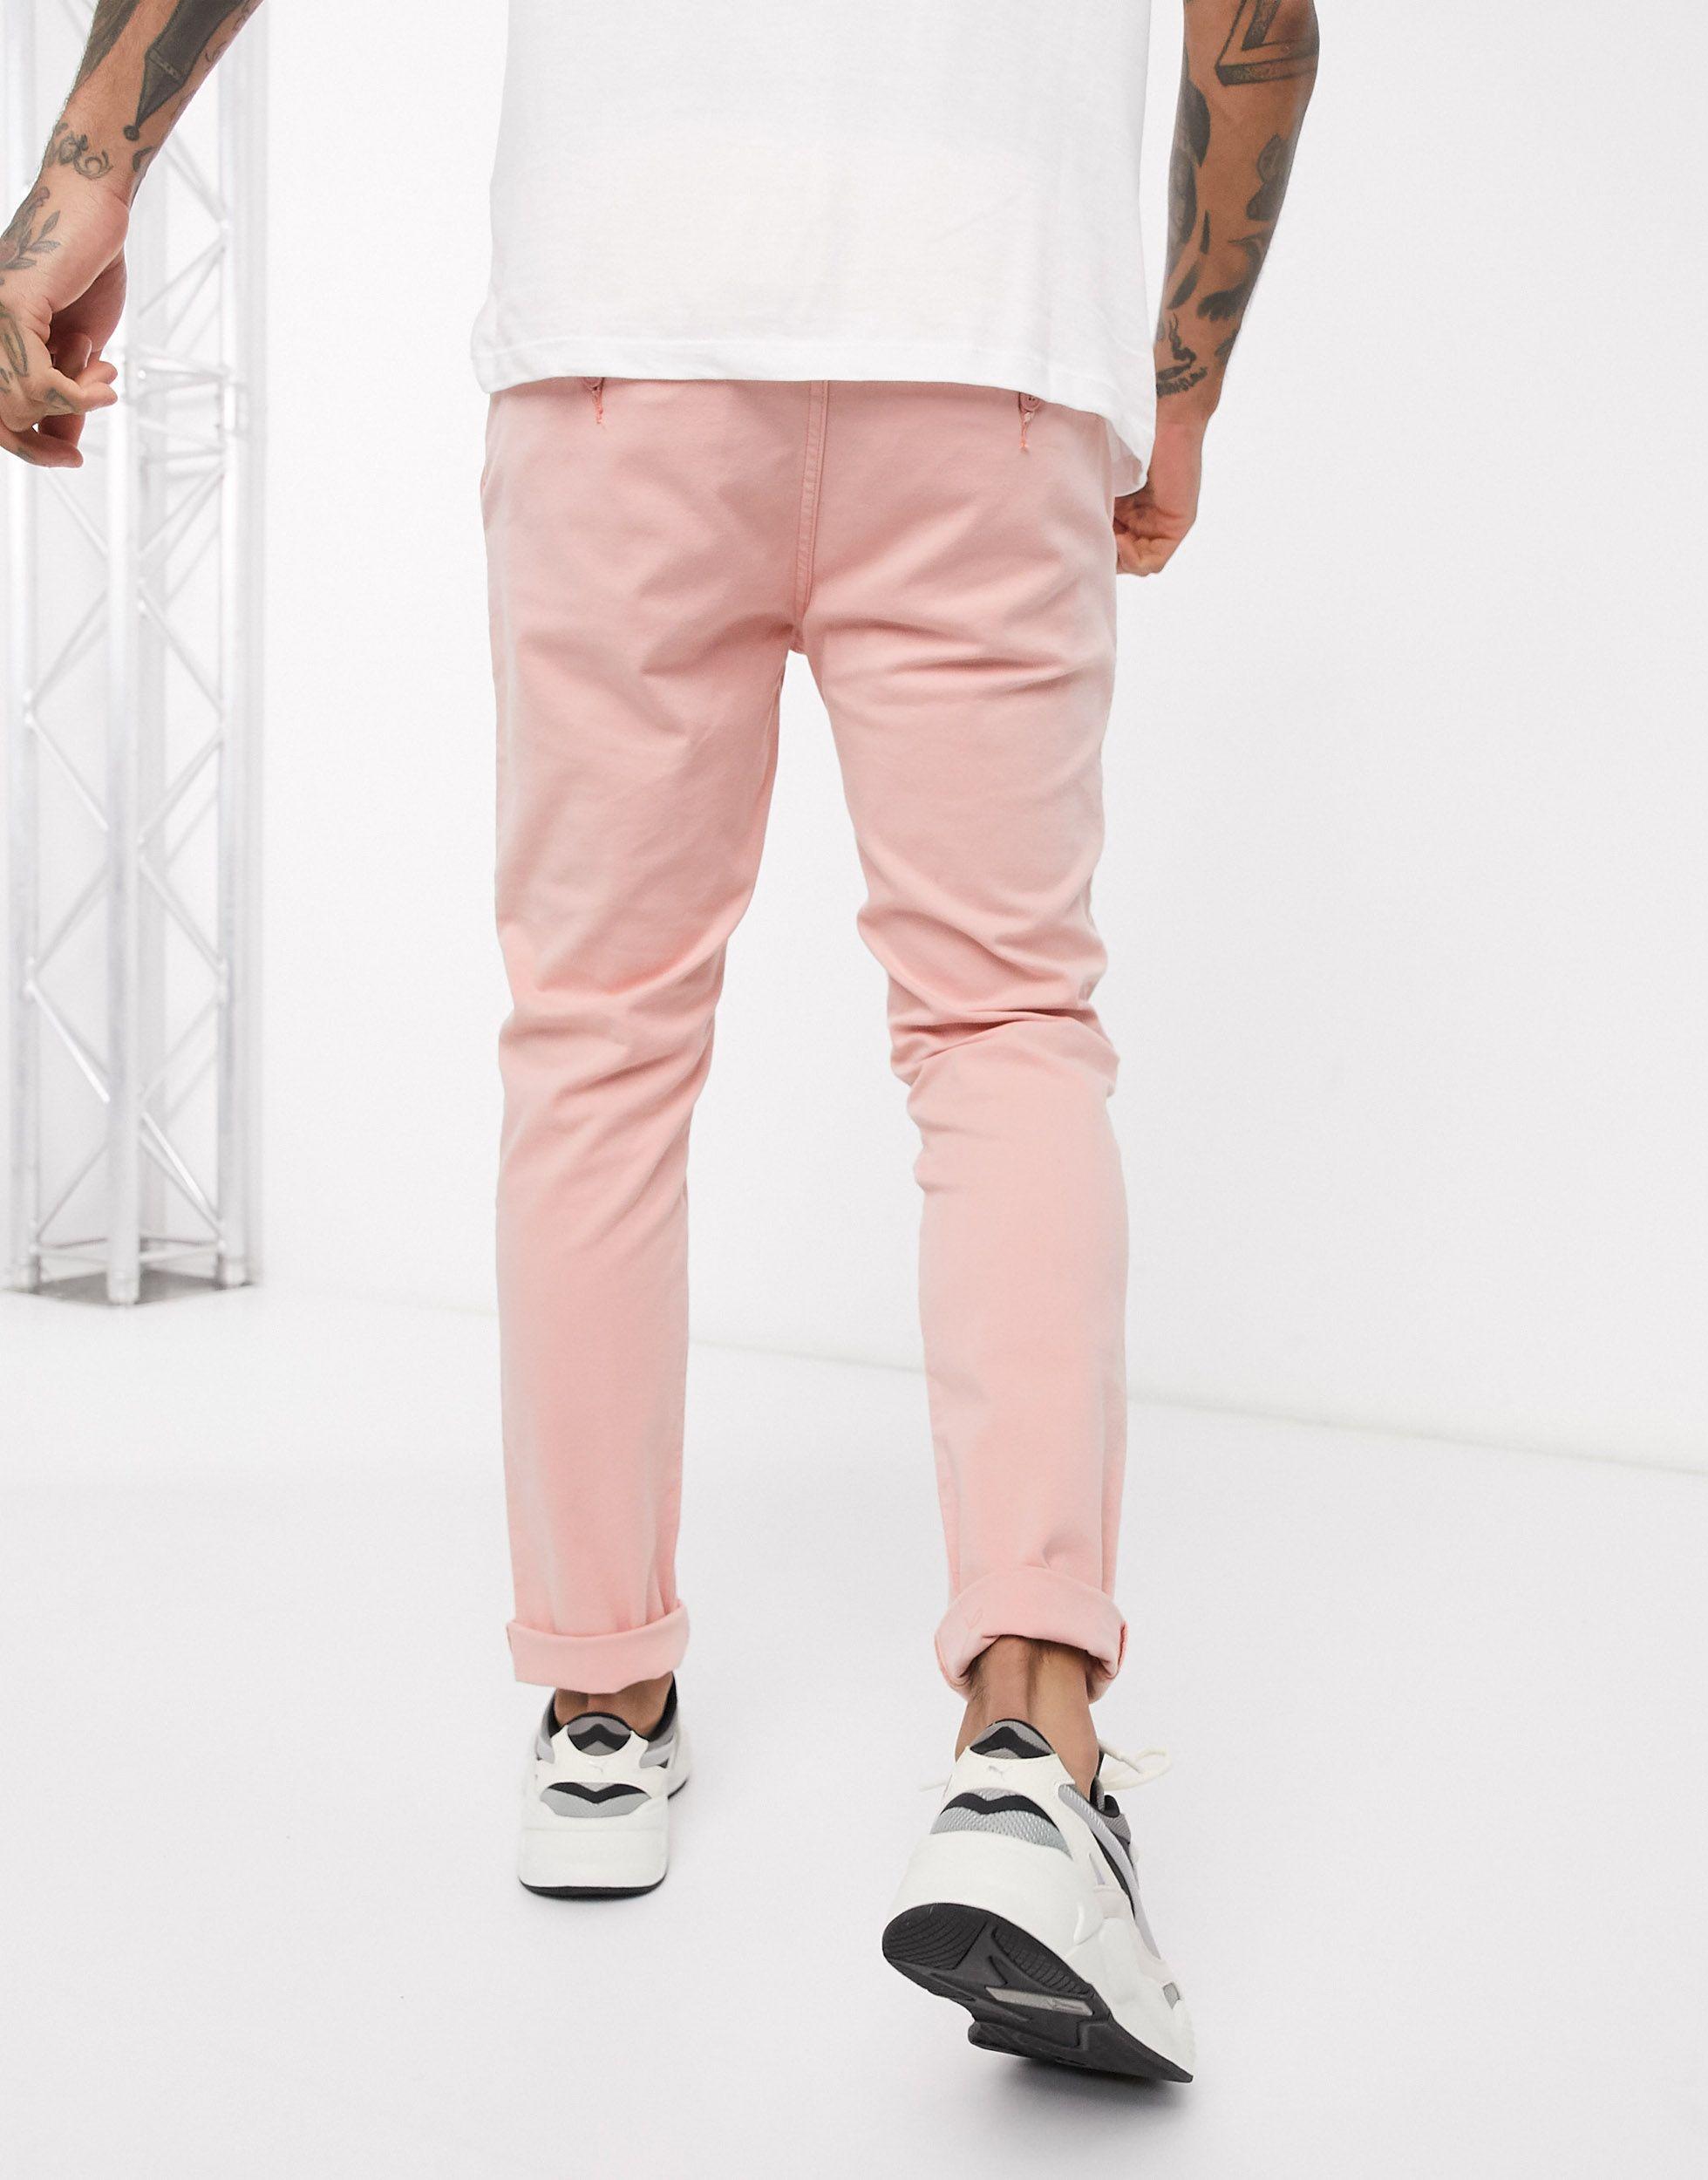 Levi's Slim Tapered Fit Chinos in Pink for Men - Lyst